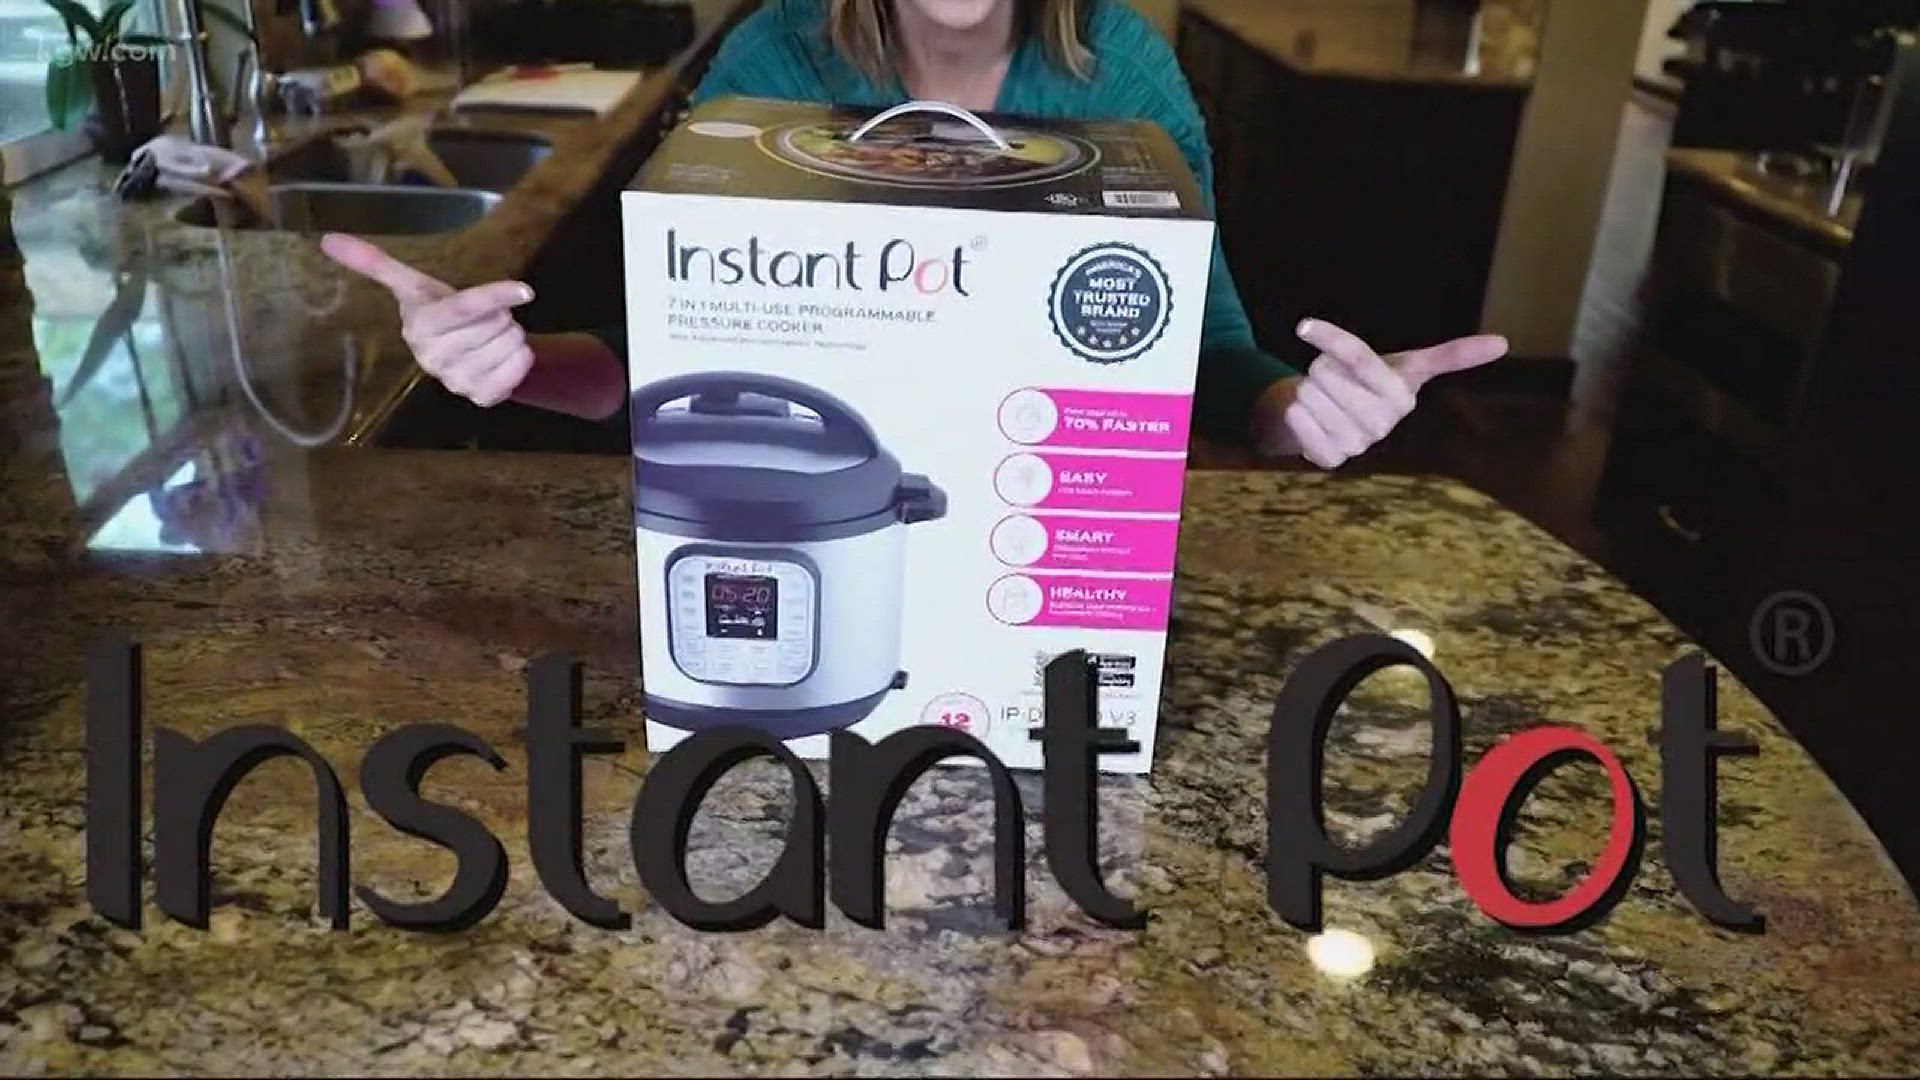 Is it worth it? Testing out "The Instant Pot"